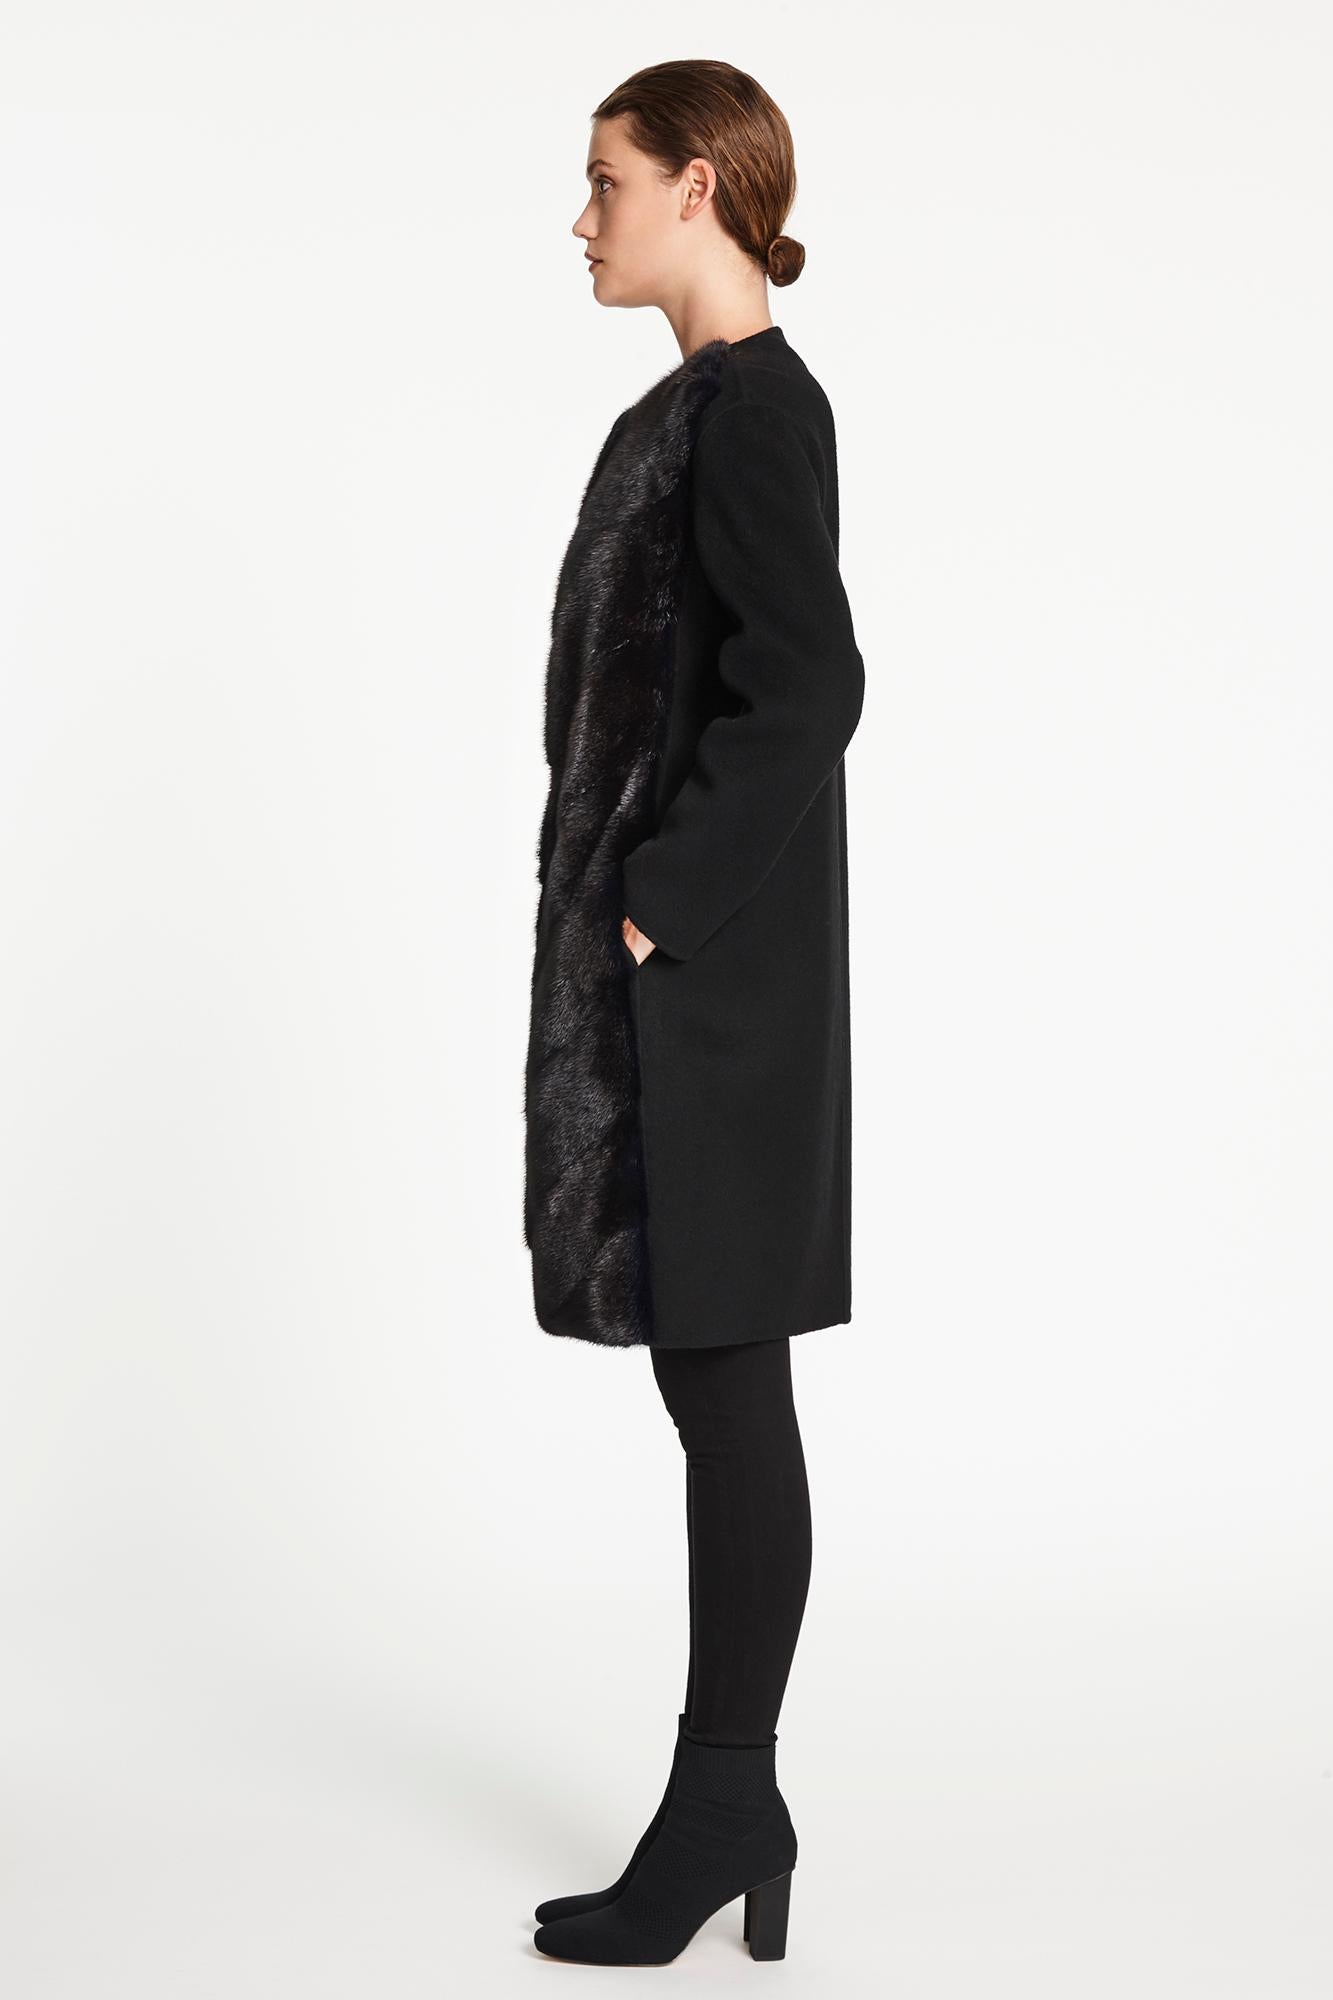 Brand New Collarless Coat Cashmere and in Navy Black Mink Fur 5